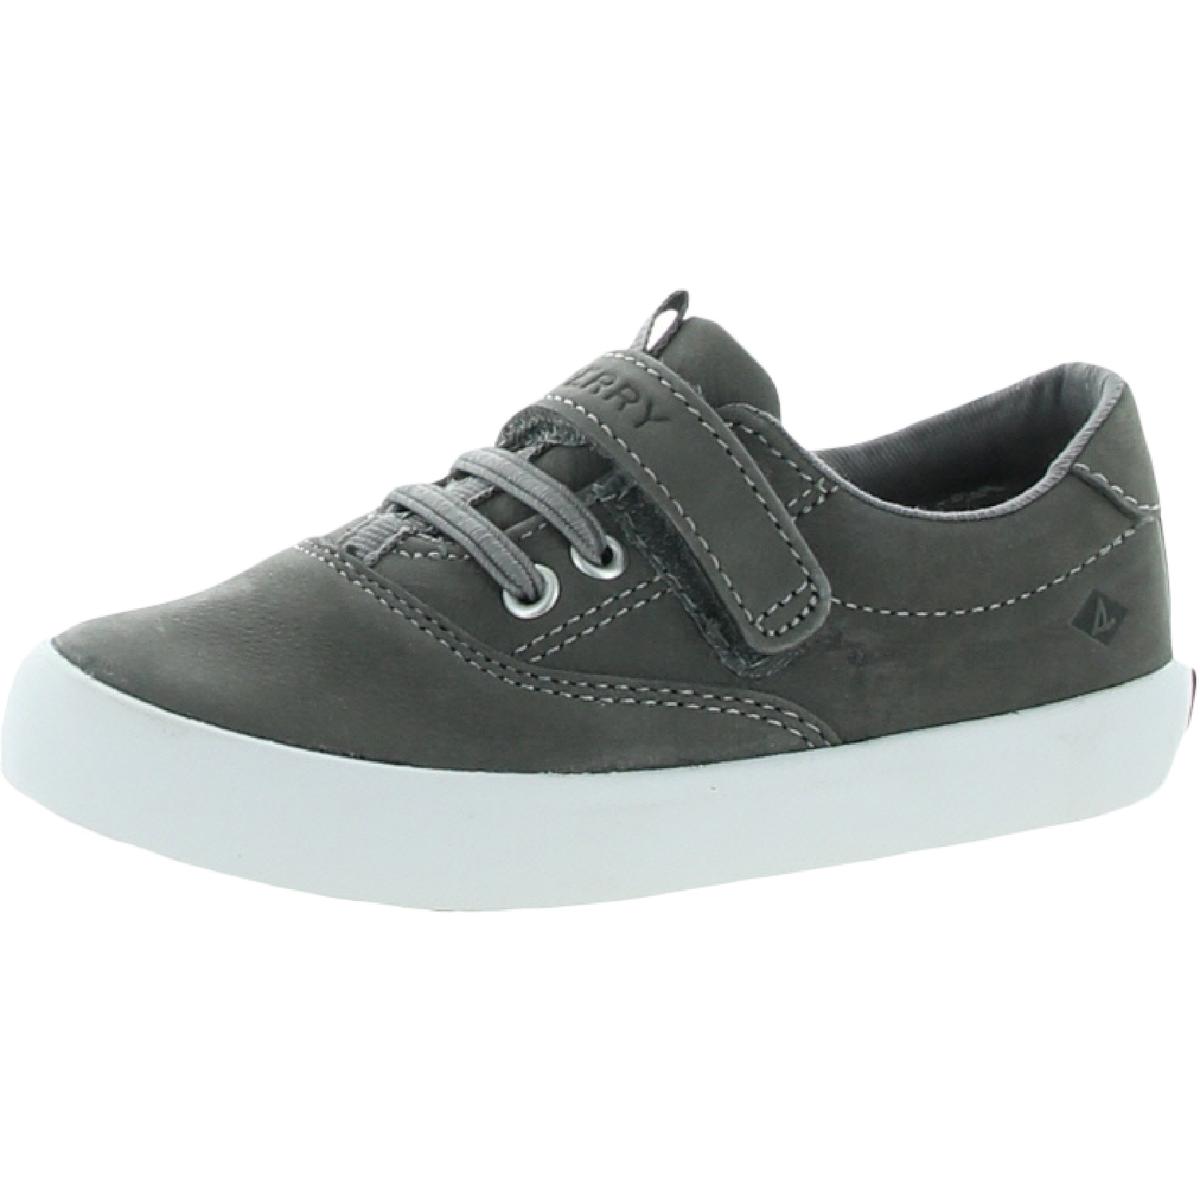 Sperry Spinnaker Boys Leather Laceless Casual Shoes